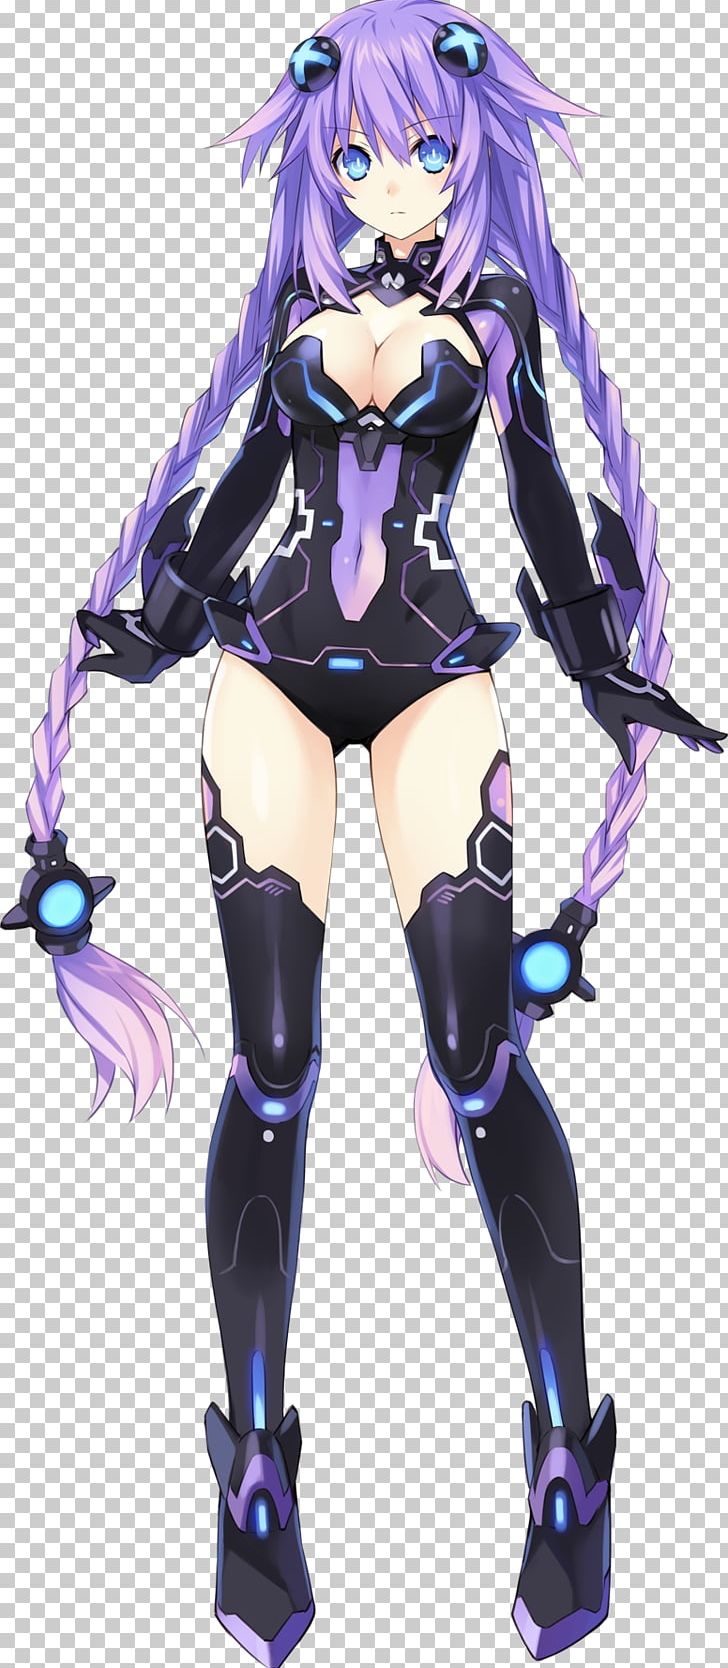 Hyperdimension Neptunia Victory Hyperdimension Neptunia Mk2 Megadimension Neptunia VII Hyperdevotion Noire: Goddess Black Heart PlayStation 3 PNG, Clipart, Anime, Black Hair, Brown Hair, Cartoon, Character Free PNG Download